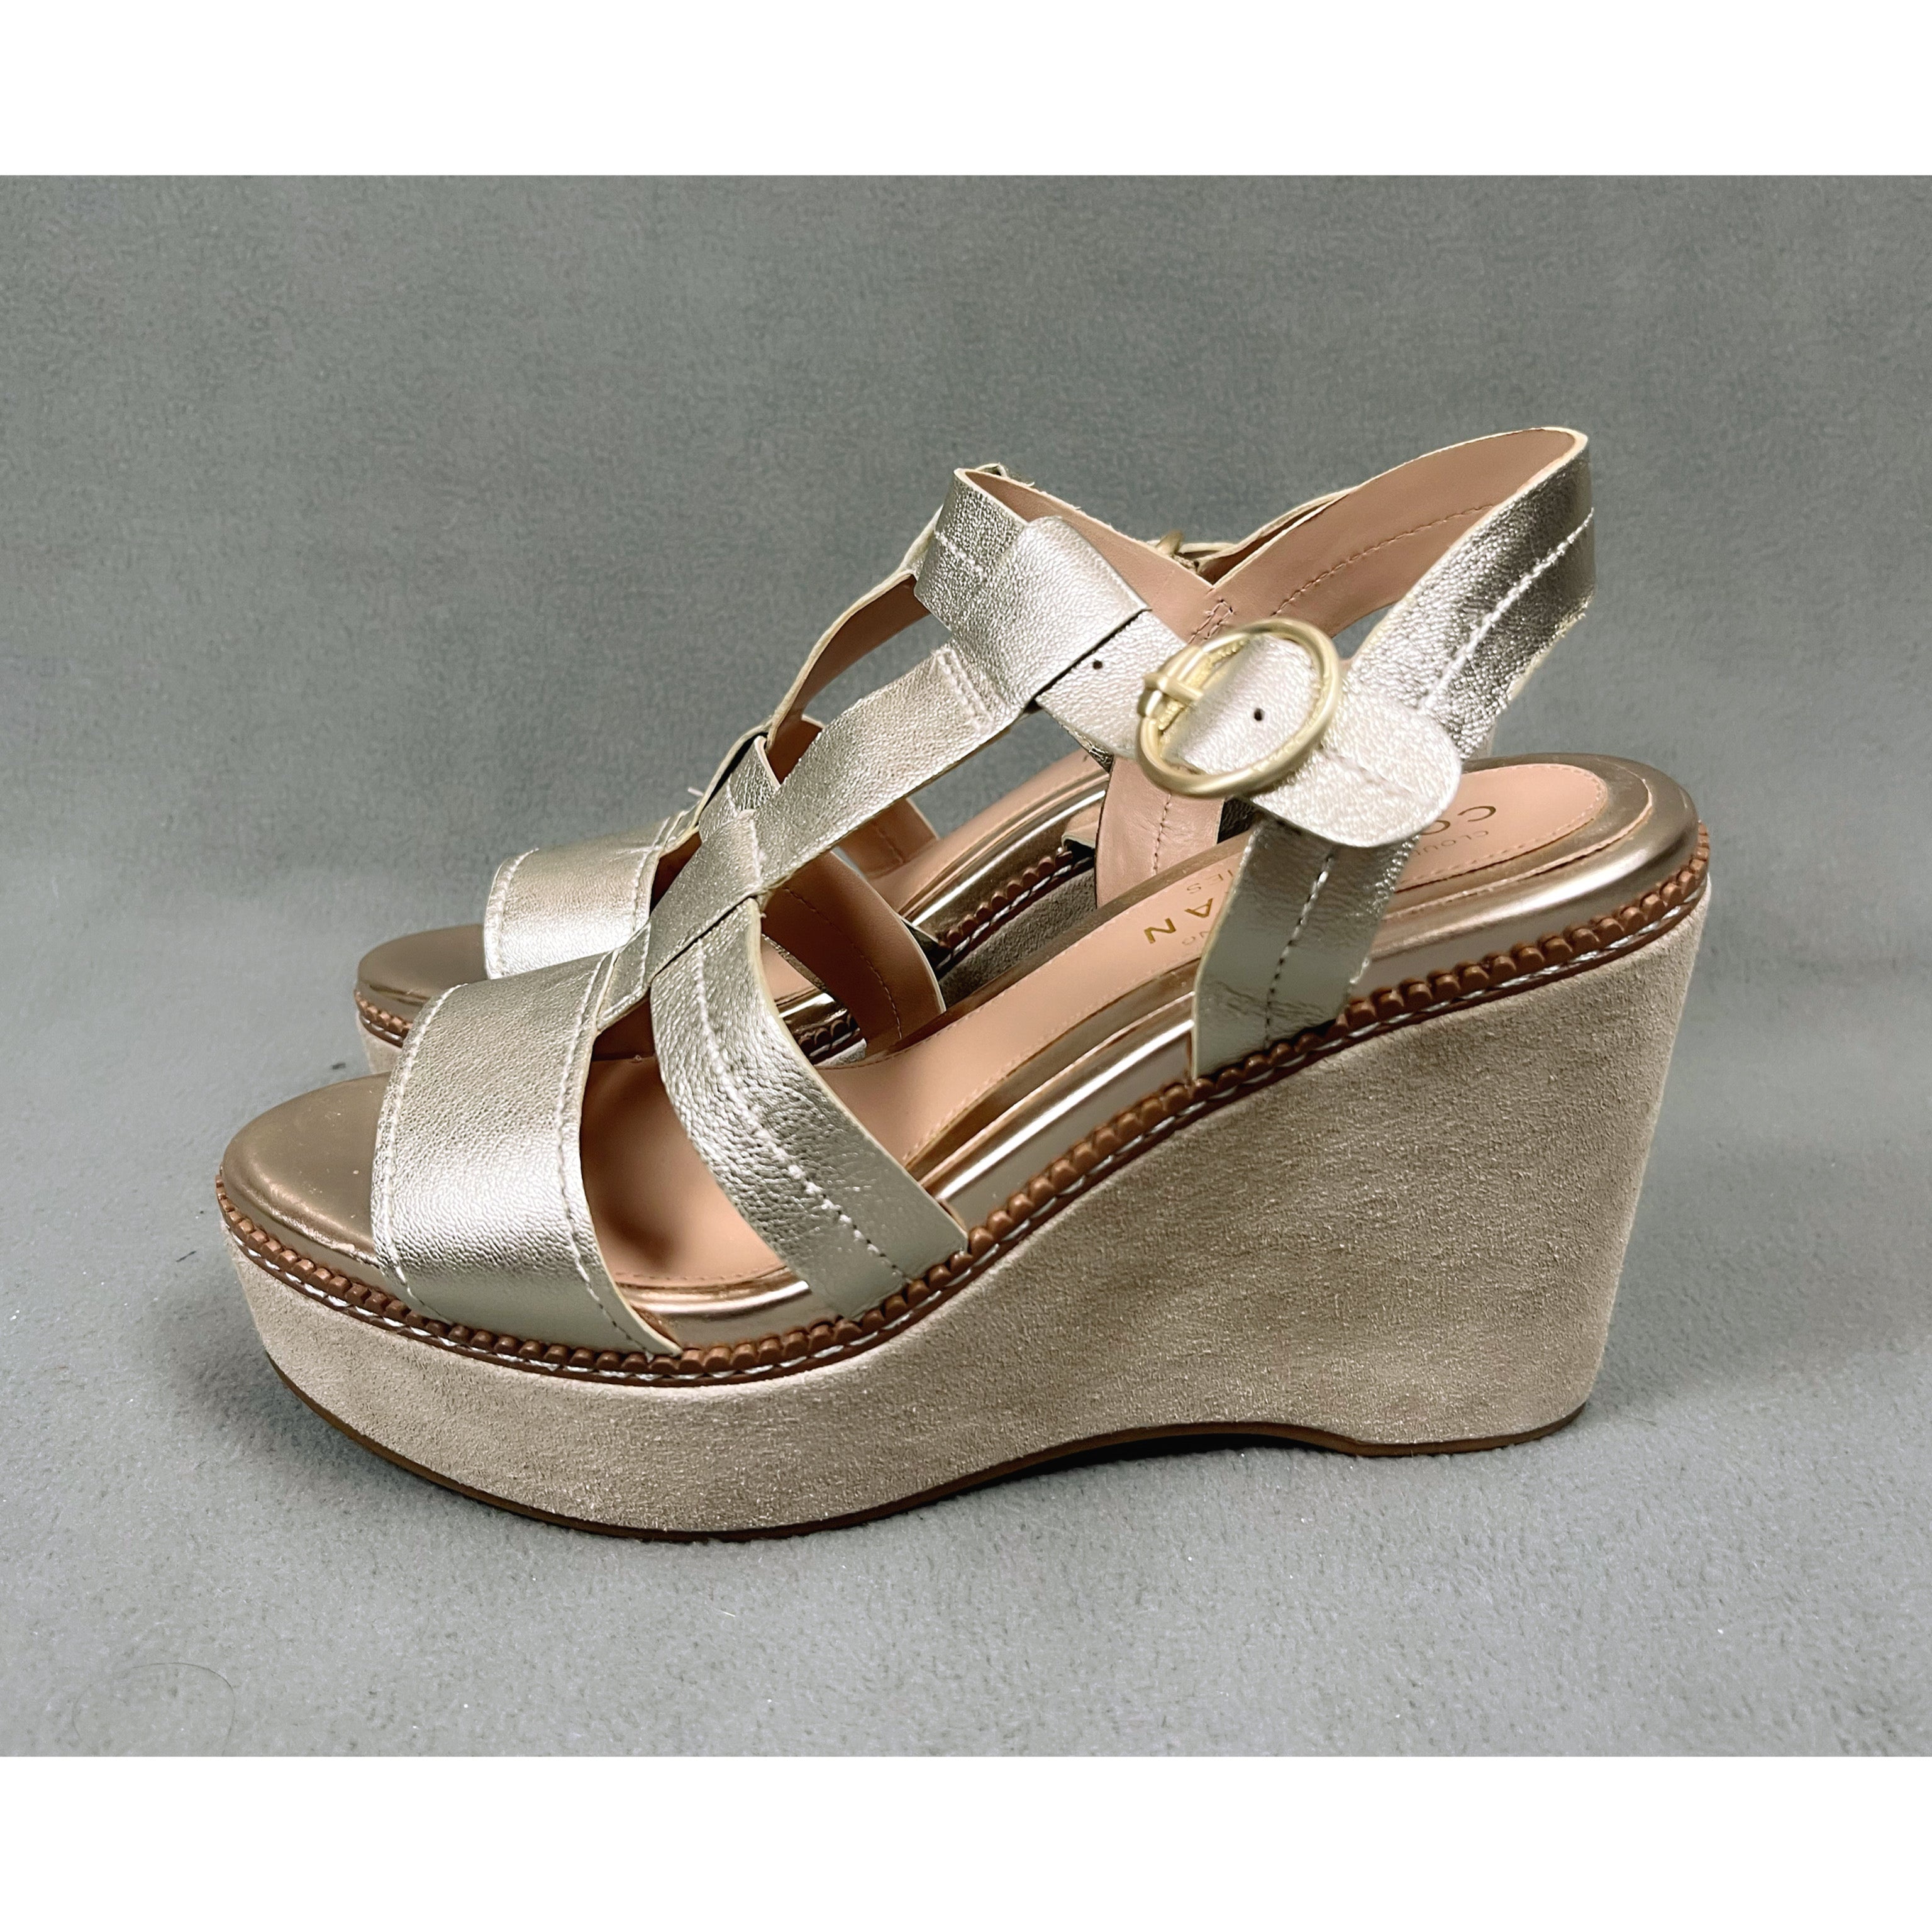 Cole Haan gold wedge sandals, size 6, BRAND NEW!